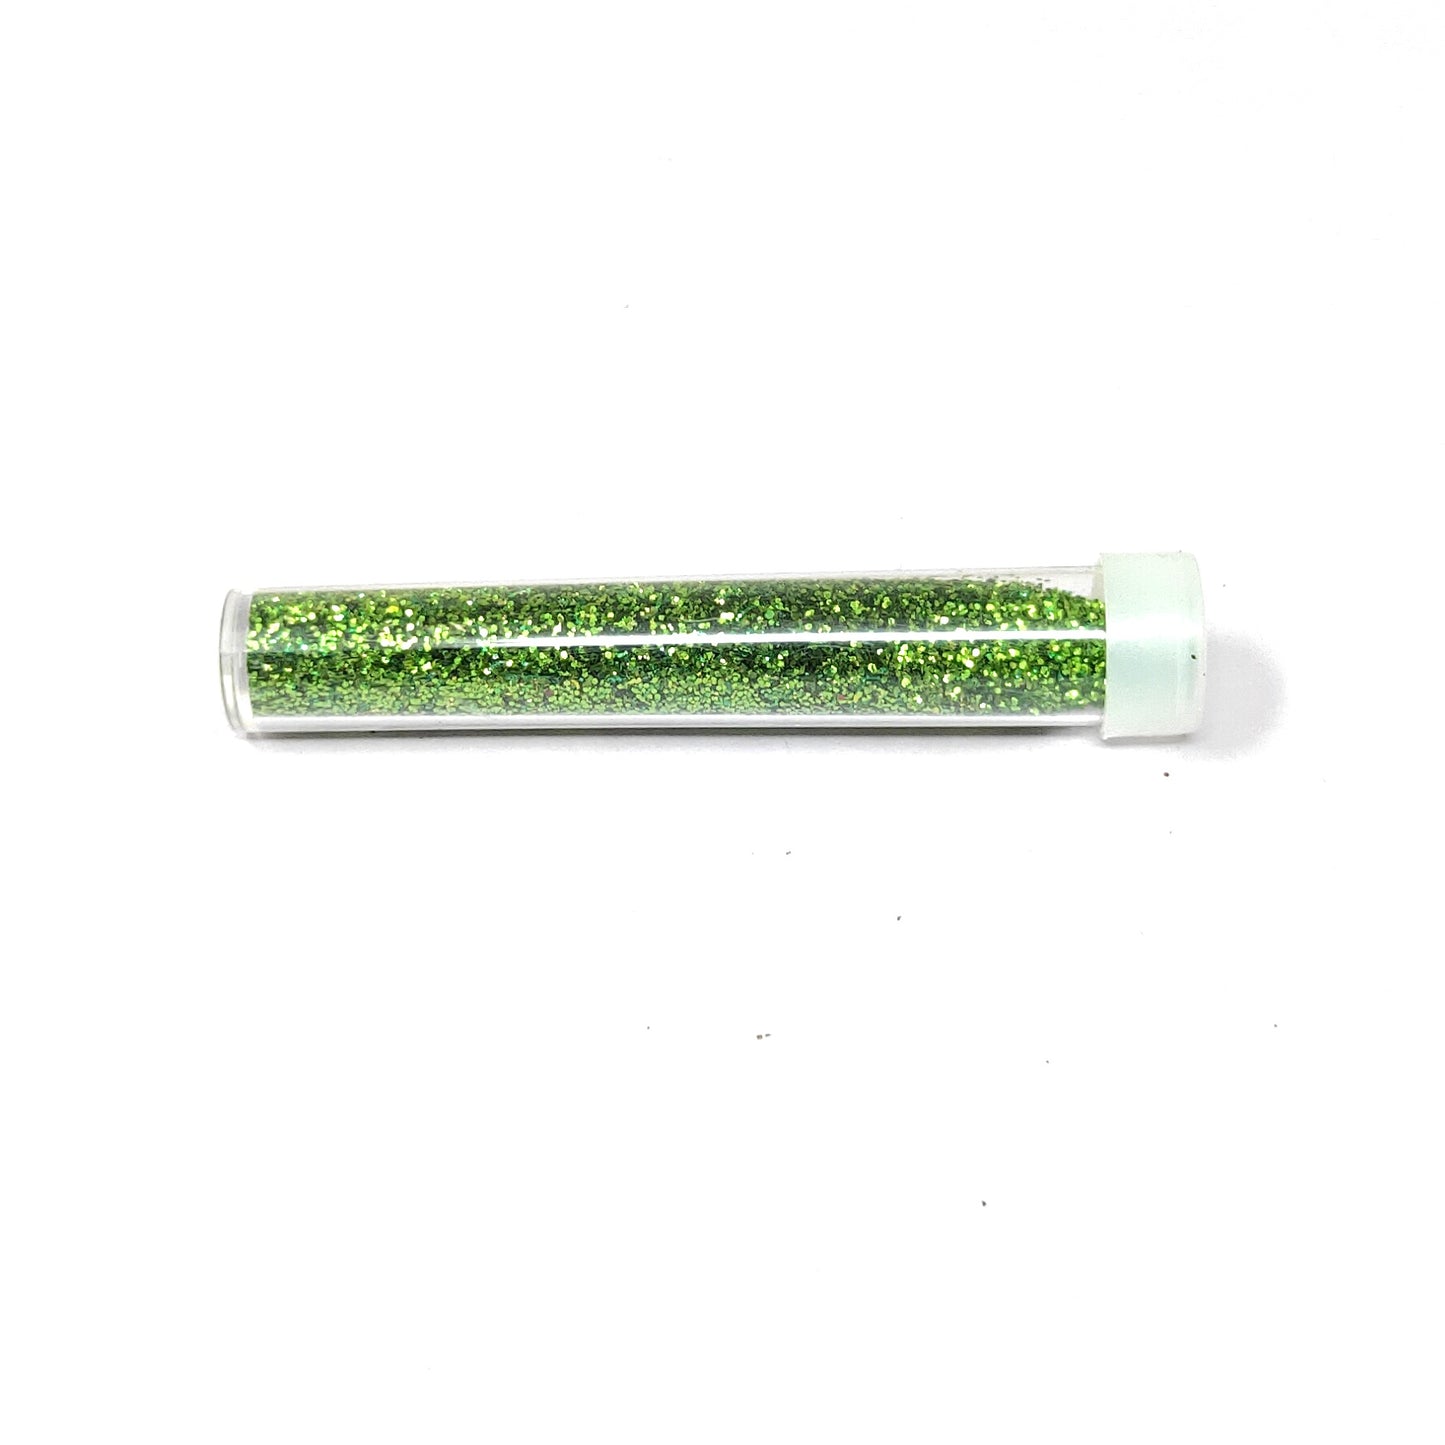 5 gram Green Glitter for Arts and Crafts, Scrapbooking, Paper Decorations and Other Activities (006)